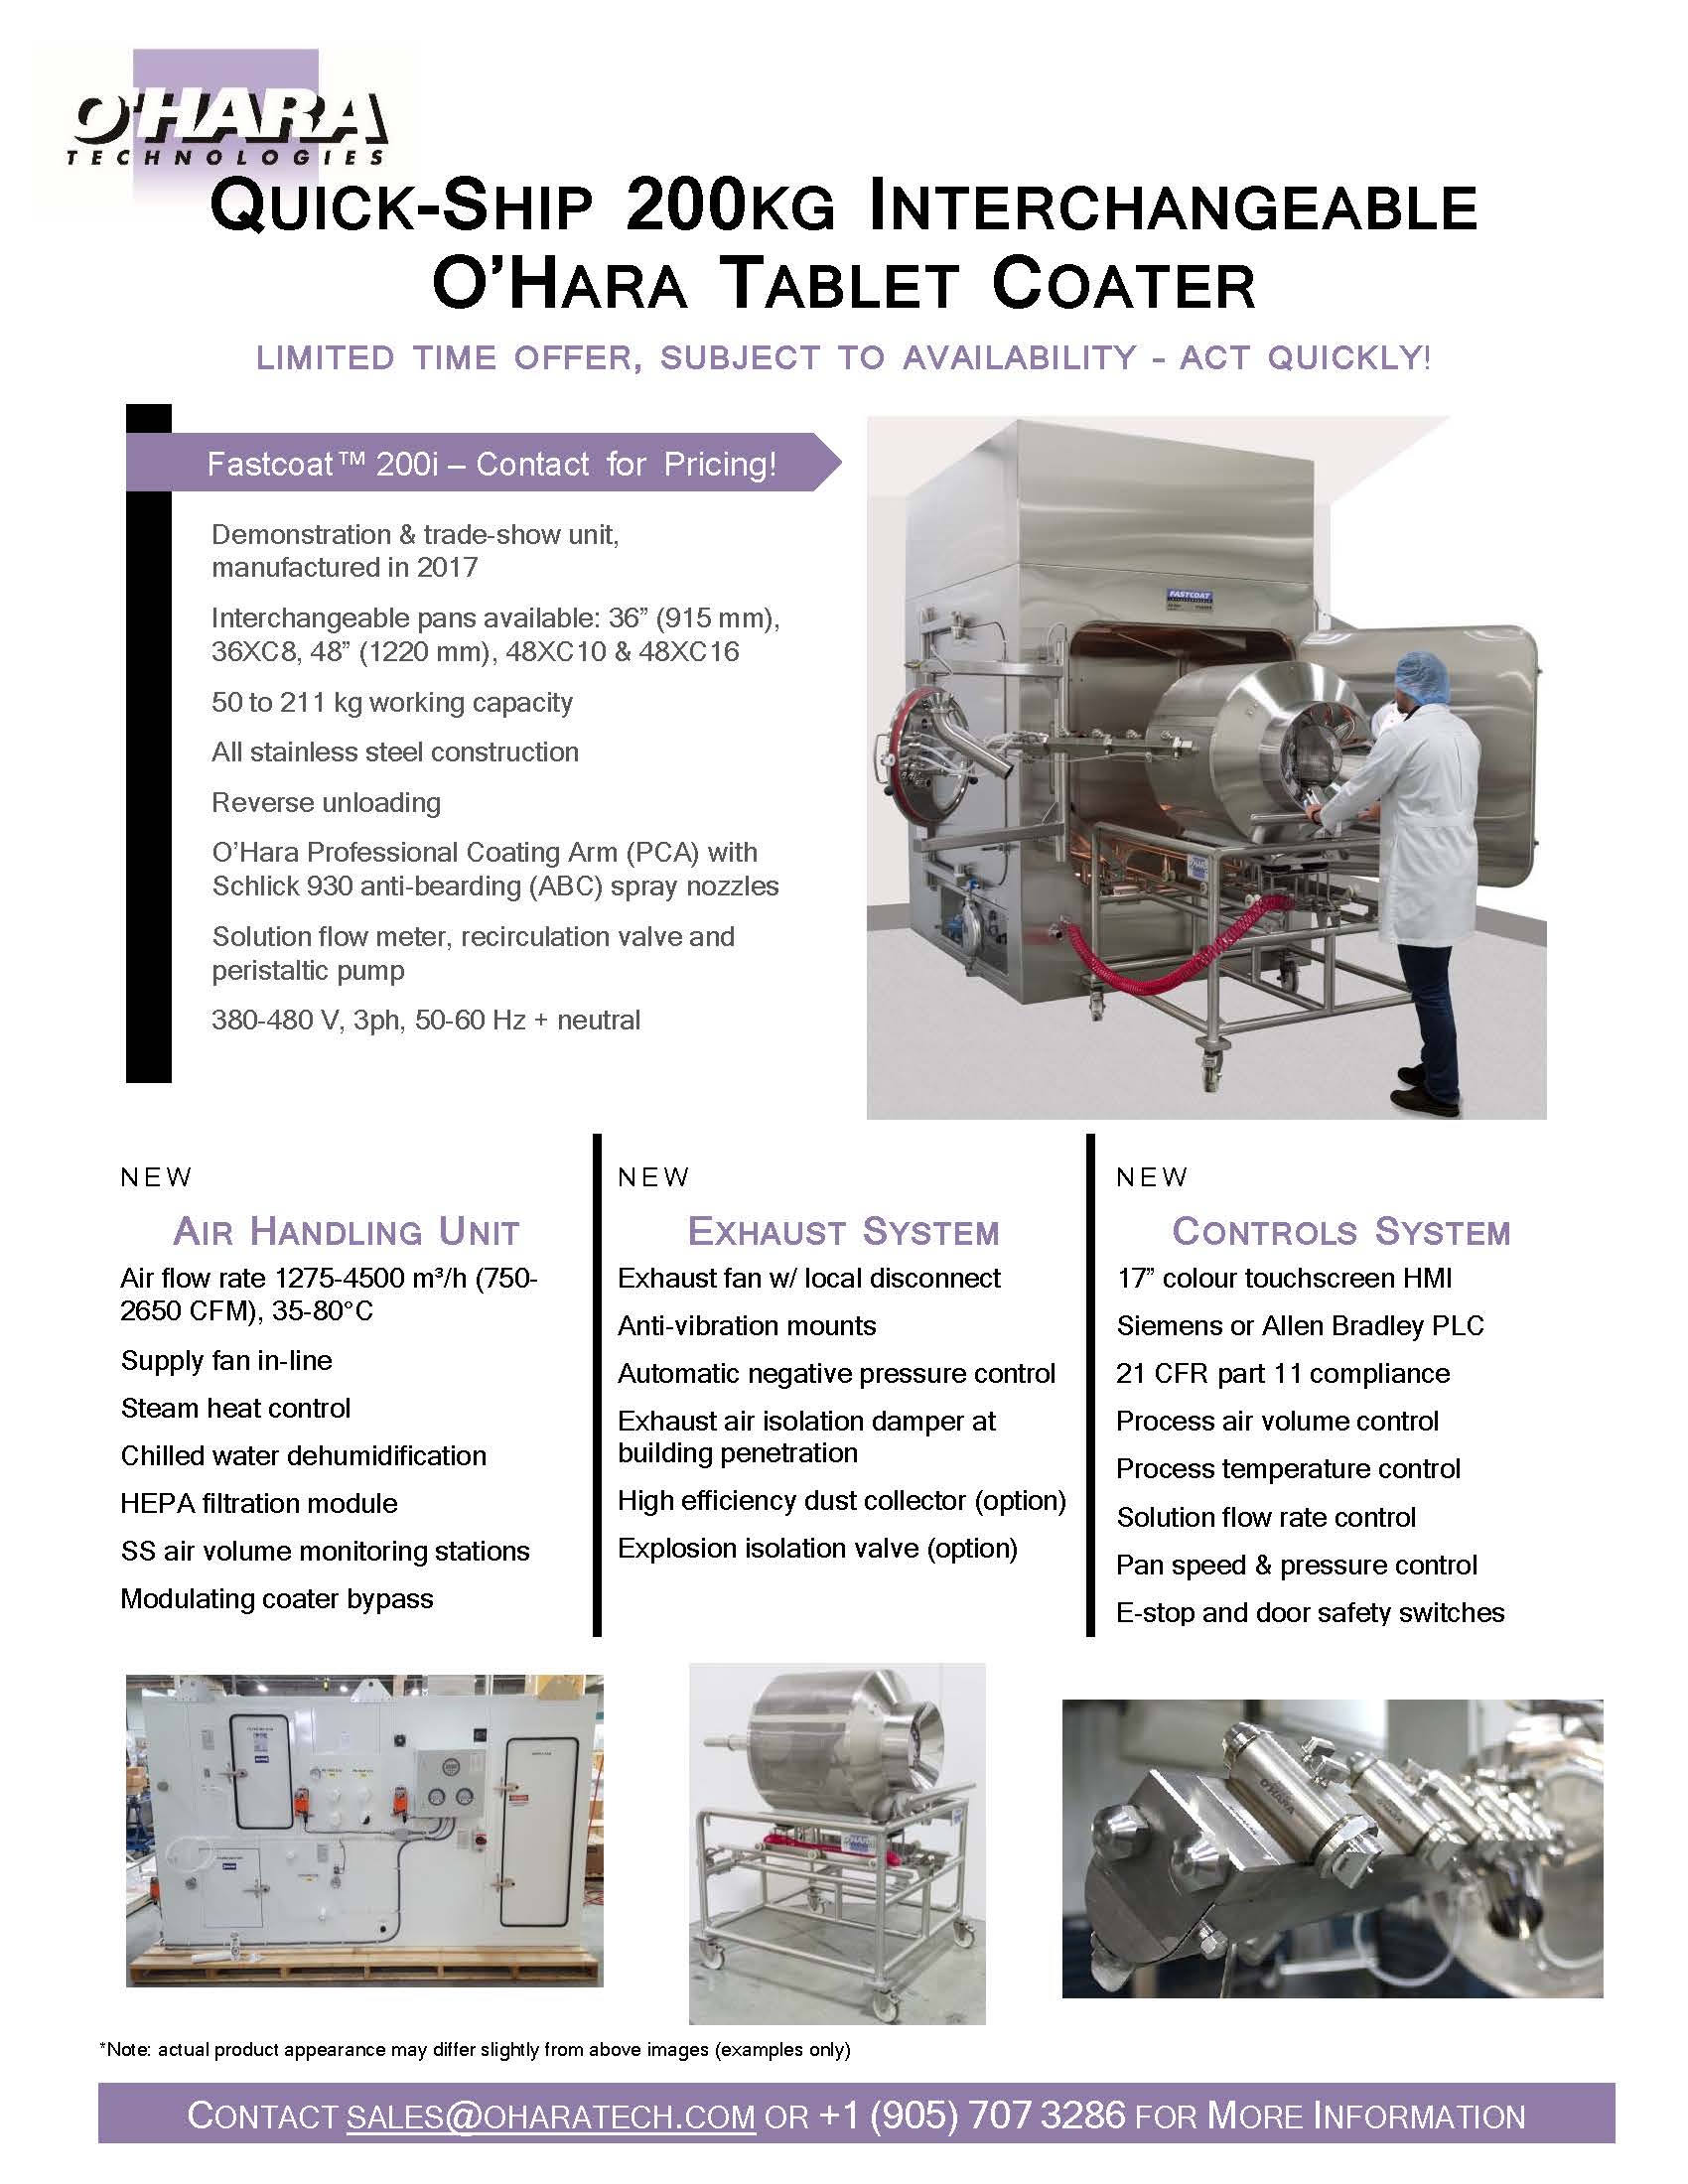 BRAND NEW QUICK-SHIP 200 KG INTERCHANGEABLE O'HARA TABLET COATER